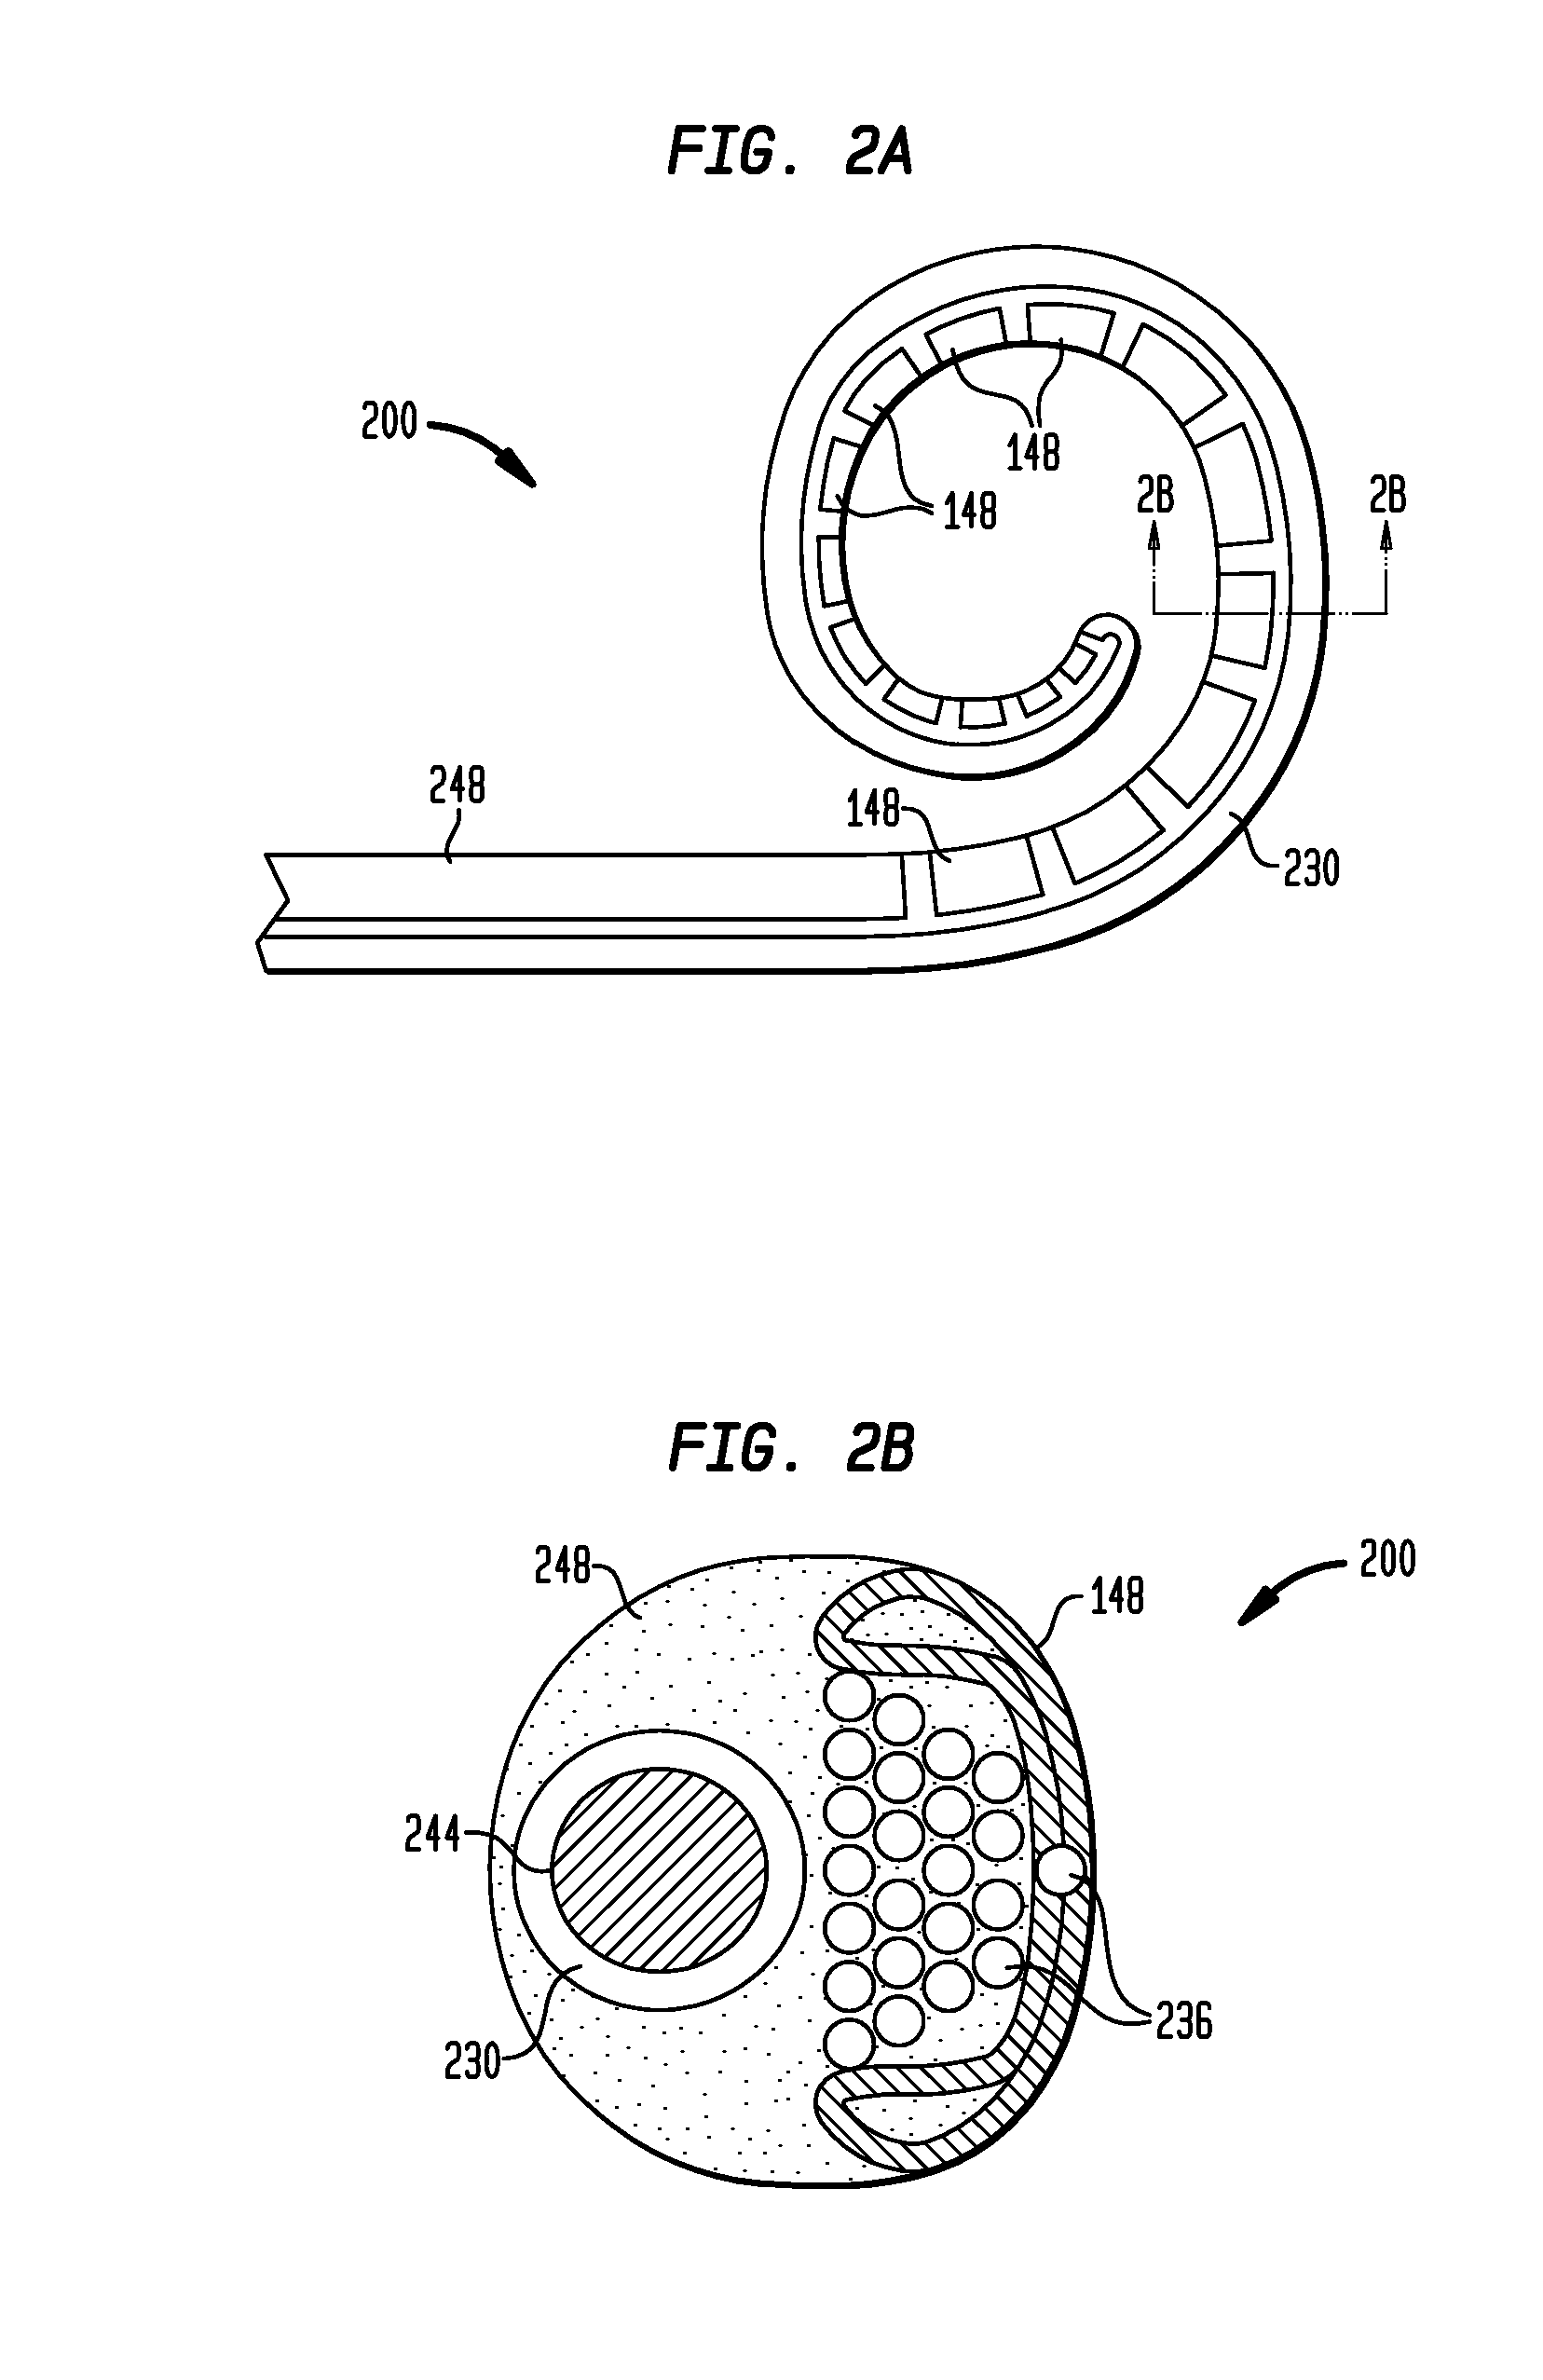 Electroneural interface for a medical implant